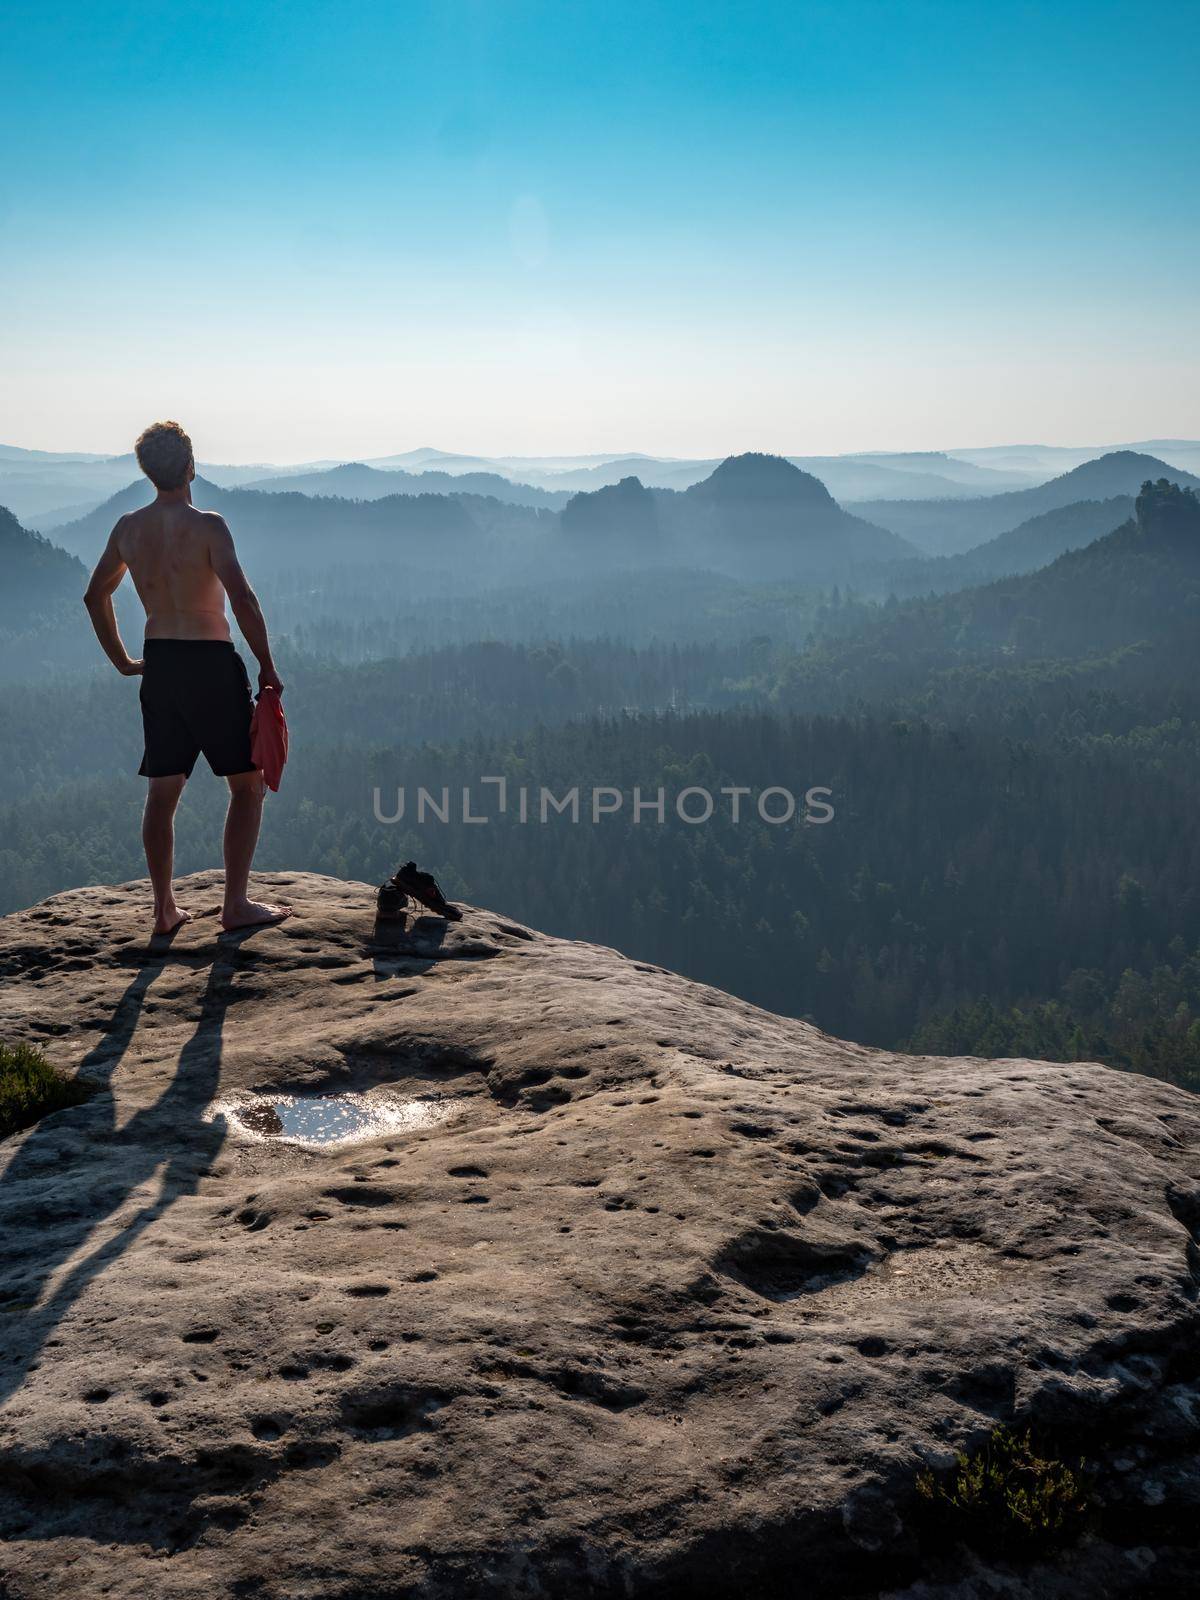 Shirtless man with a sporty figure on the edge of a rock enjoys the view by rdonar2